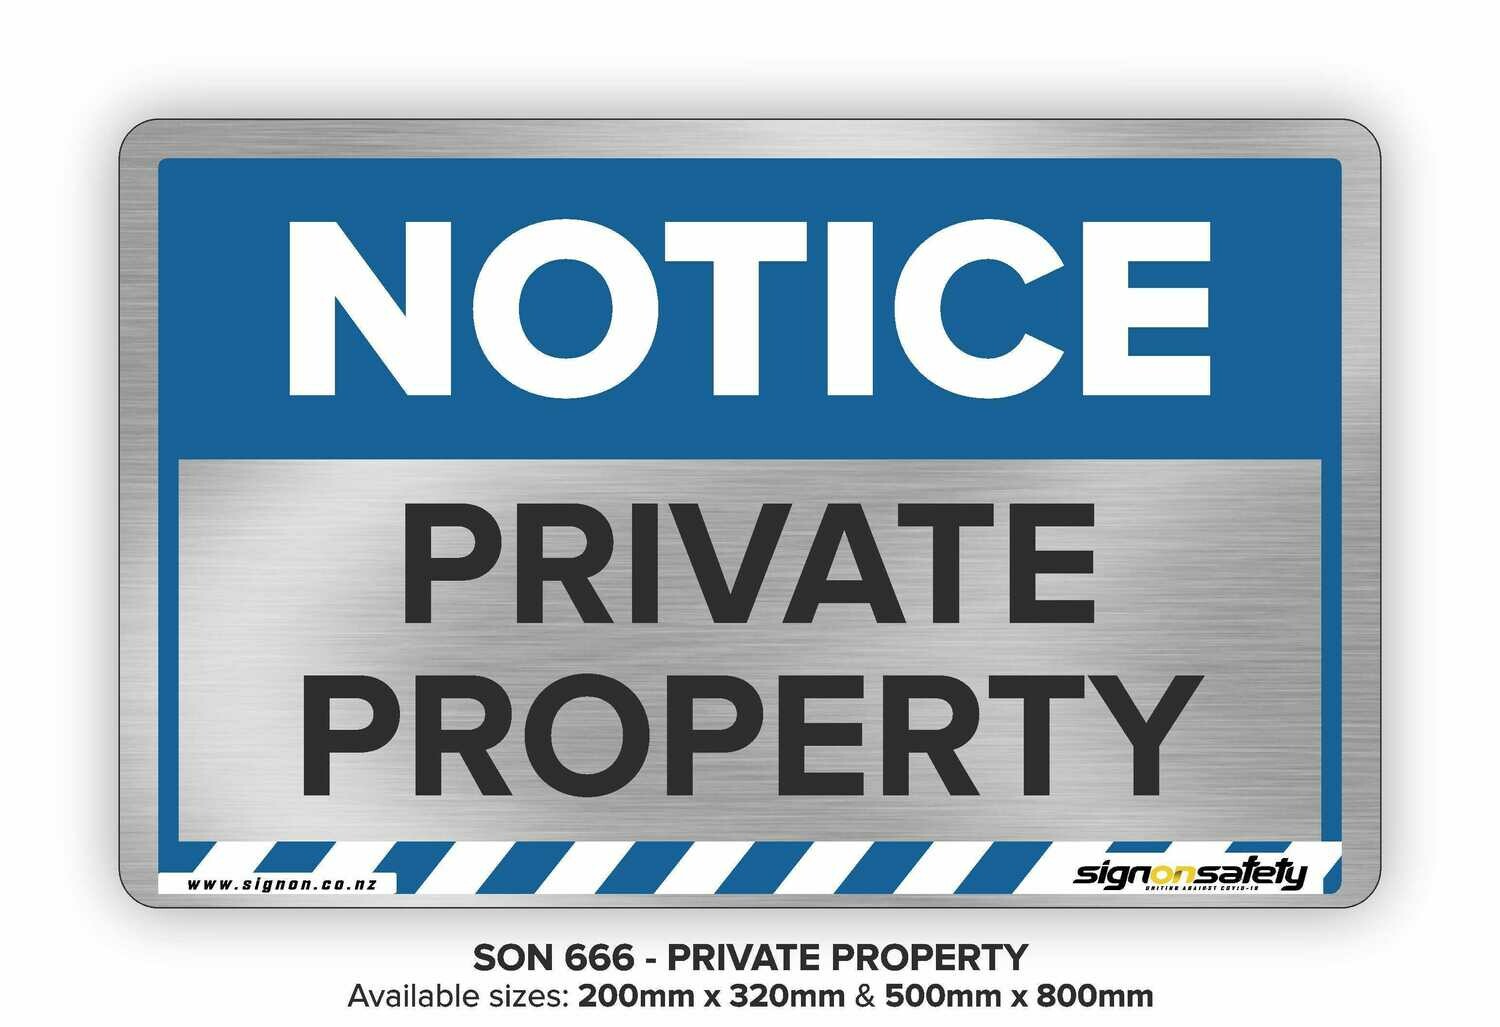 Notice - Private Property